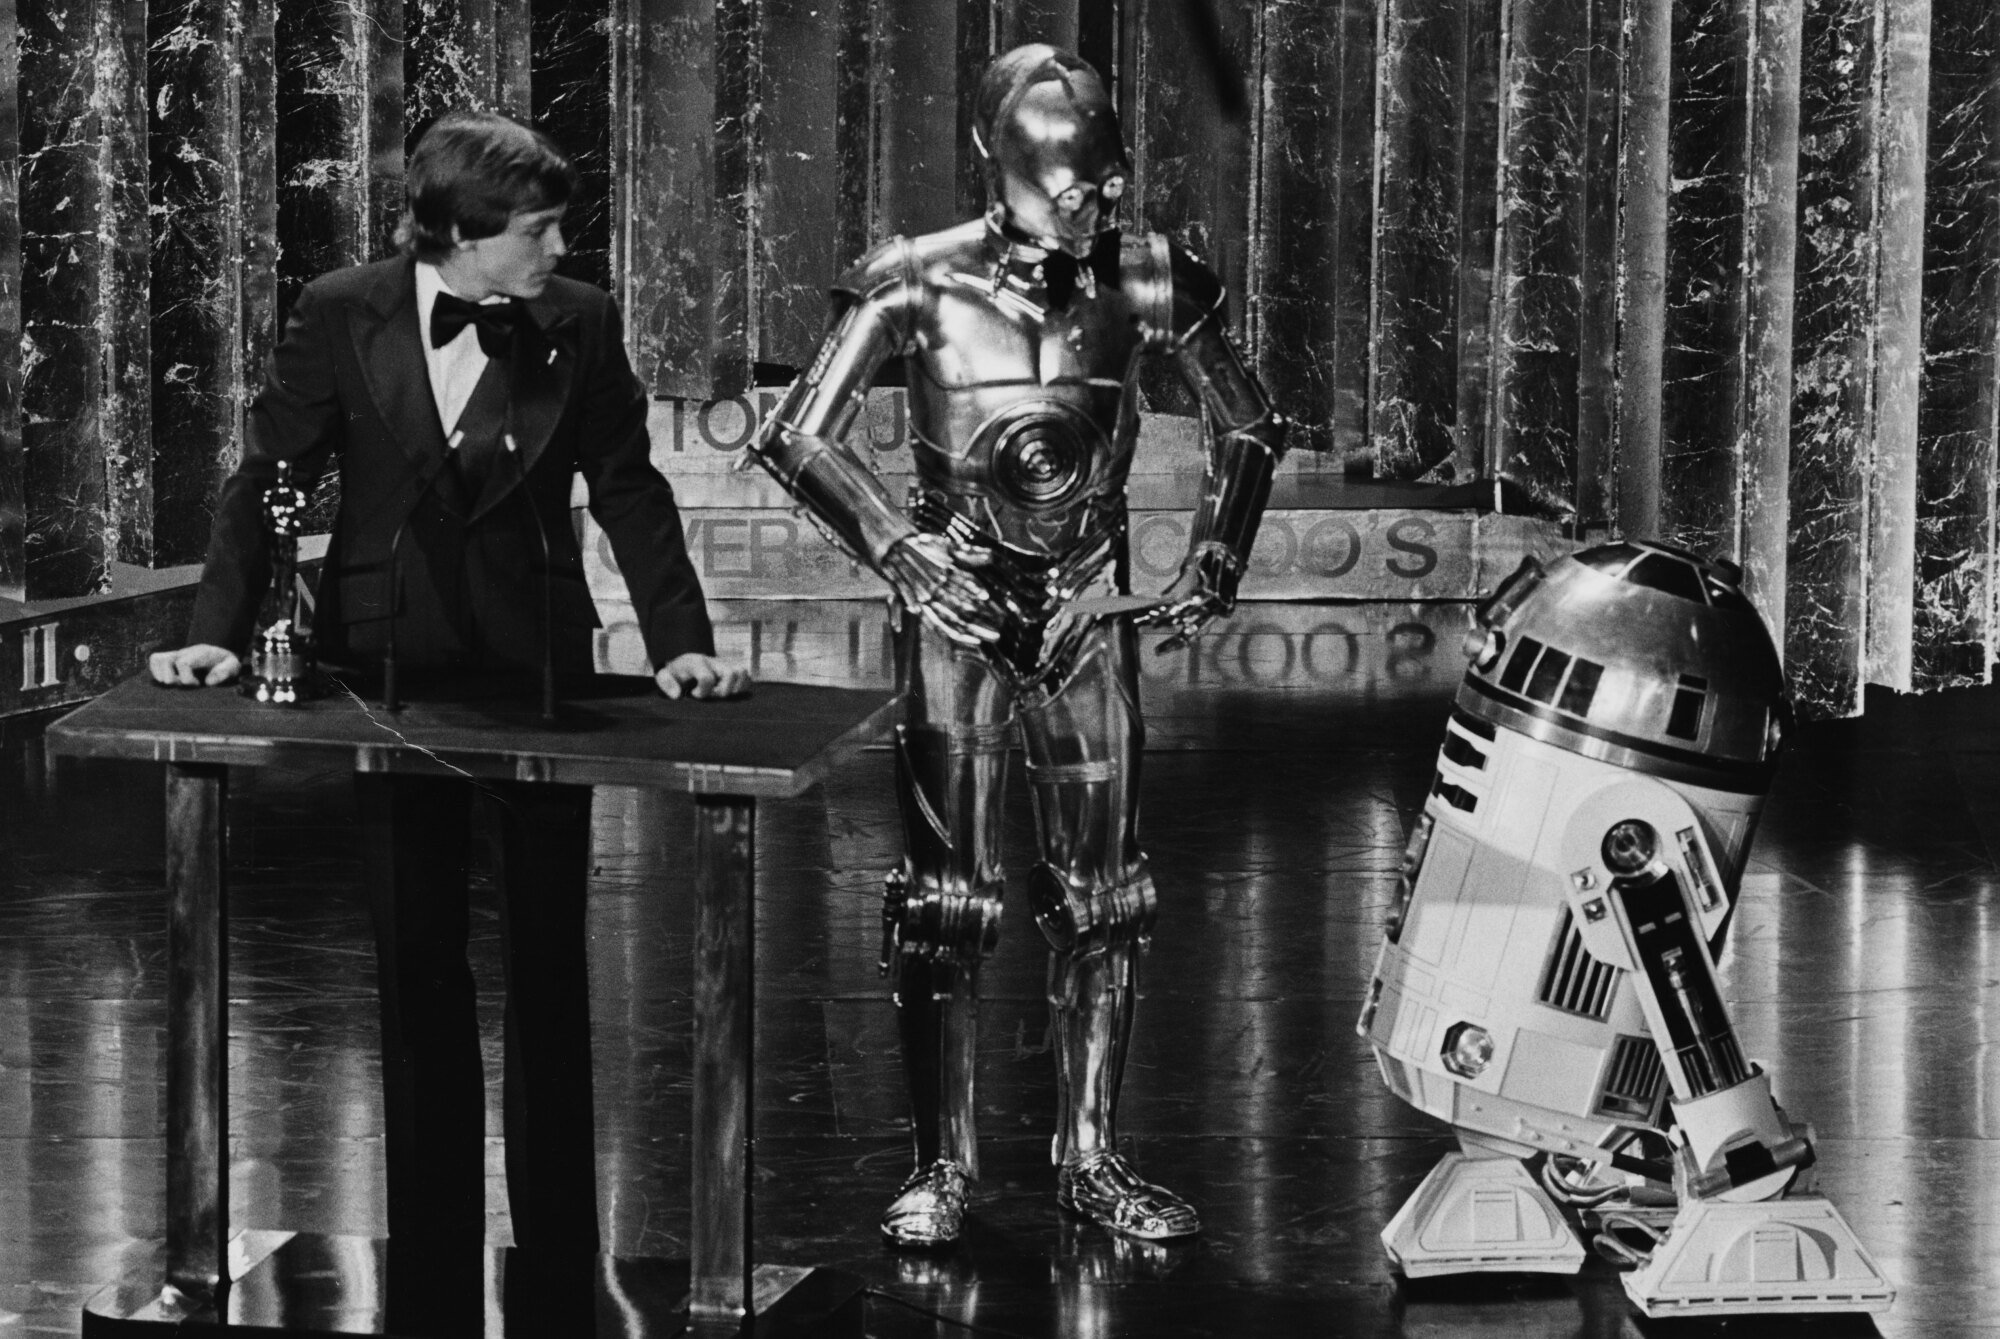 Mark Hamill stands at a podium on a stage. He's wearing a tuxedo, and C-3P0 and R2-D2 are right next to him.